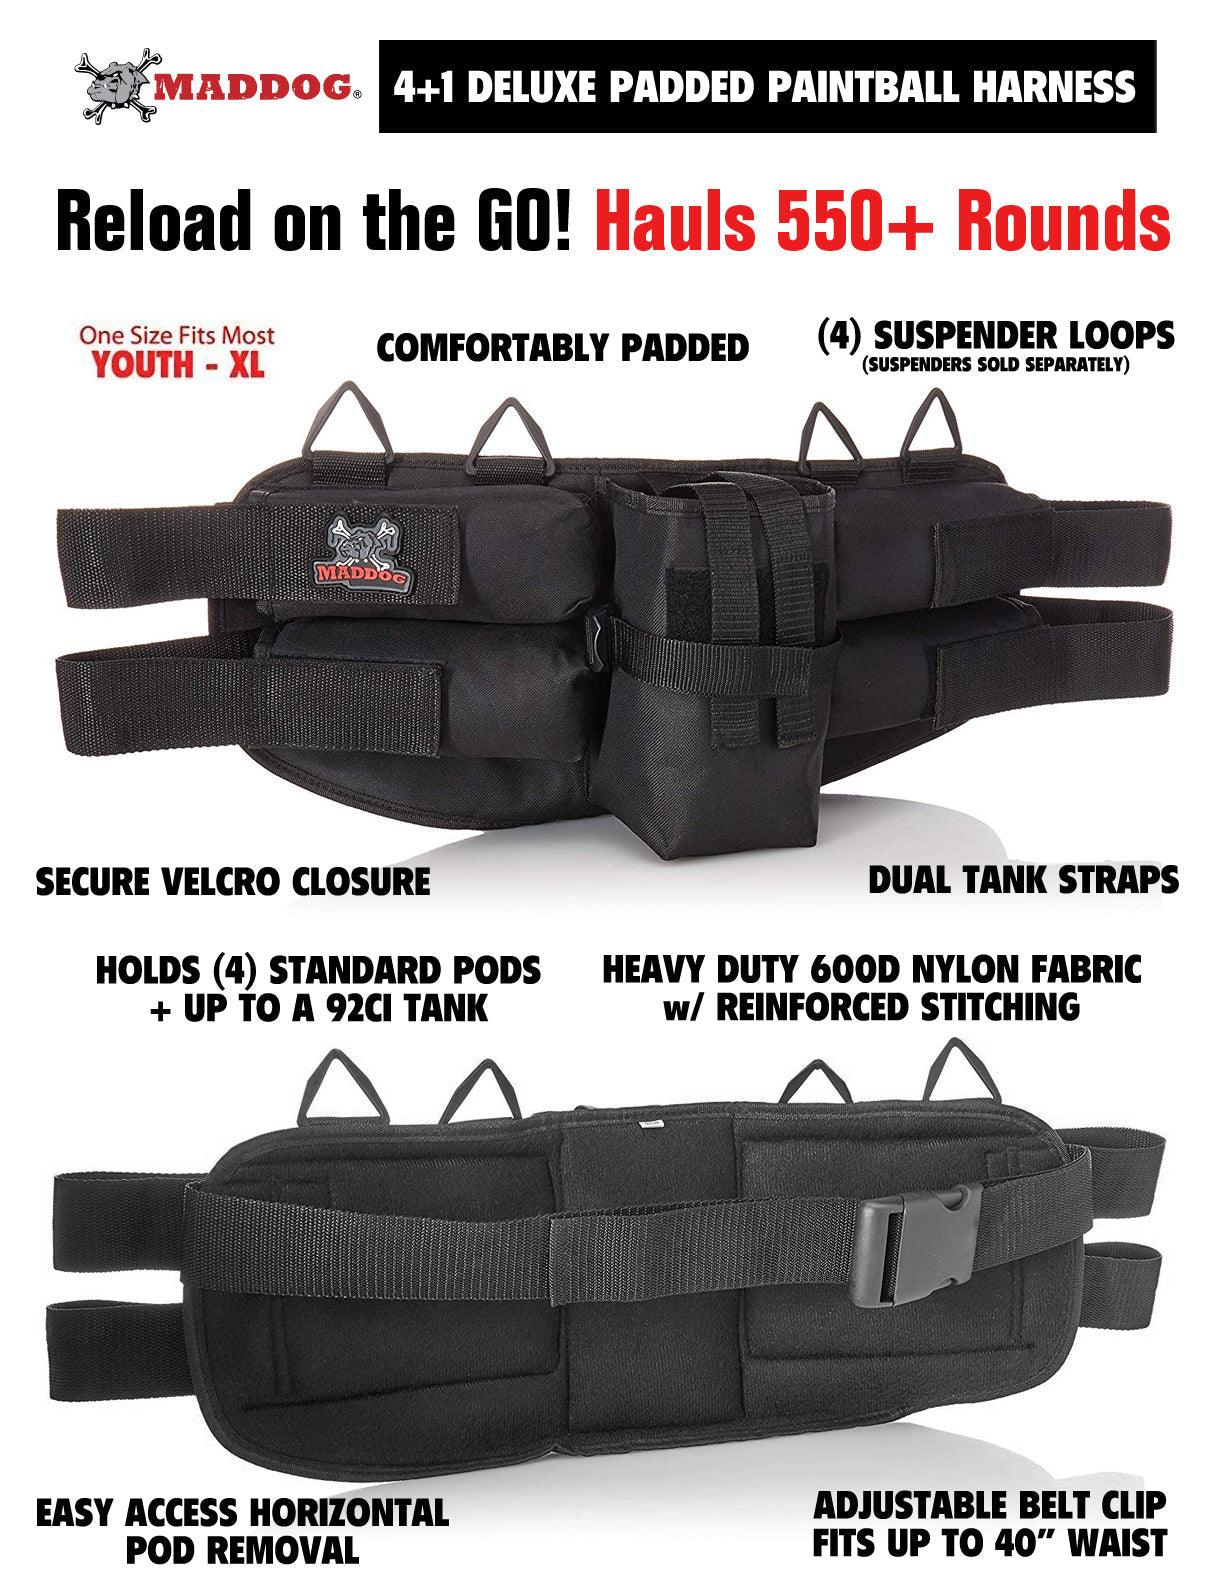 Maddog 4+1 Entry Level Paintball Harness Pod Pack Belt with HPA CO2 Tank Holder Pouch | Includes (4) Paintball Pods